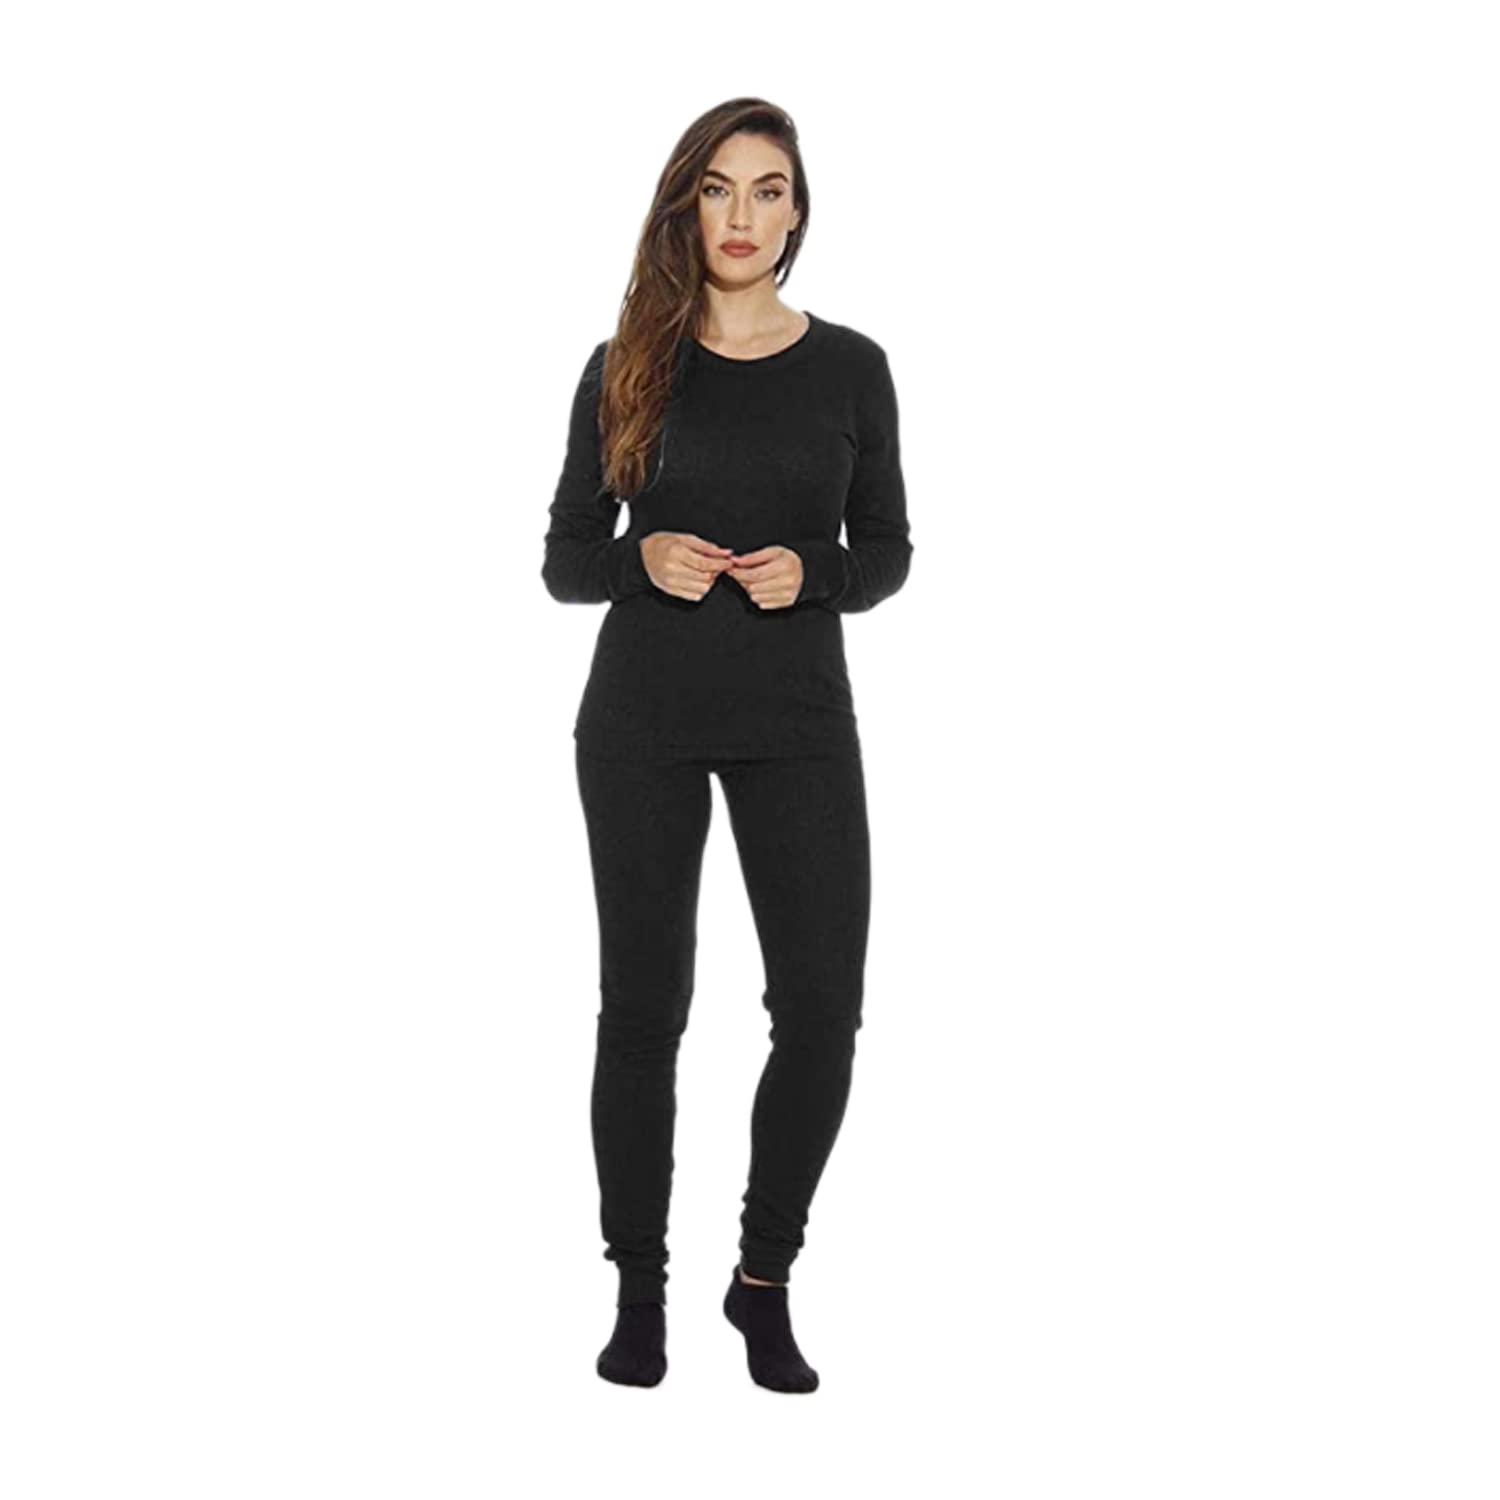 Thermals for women online